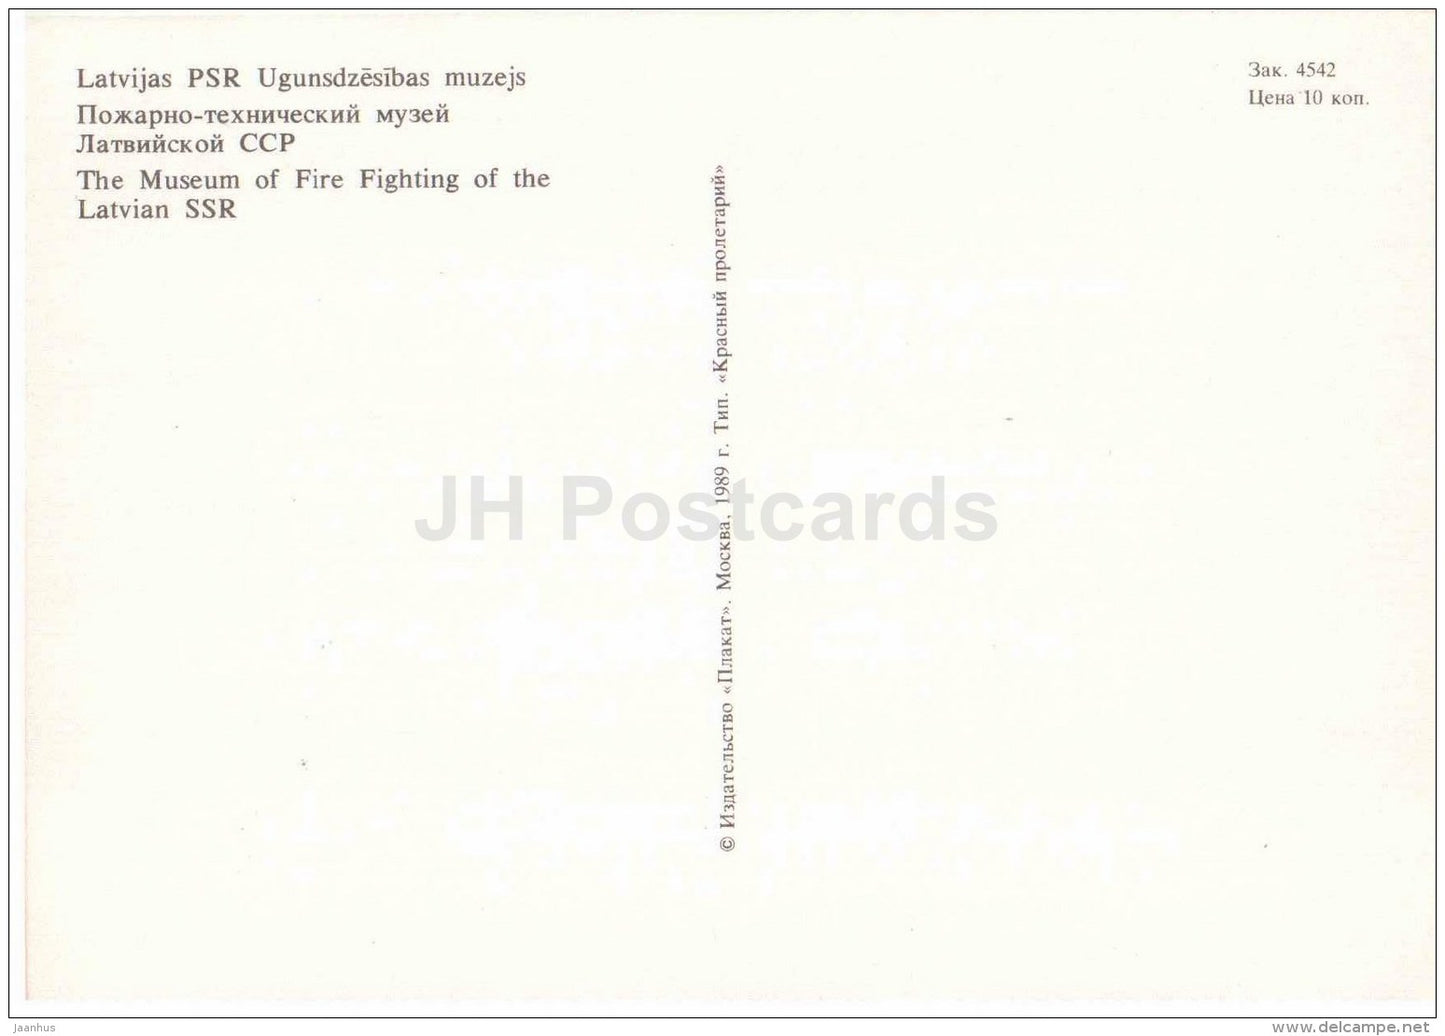 The Museum of Fire Fighting of the Latvian SSR - Riga - 1989 - Latvia USSR - unused - JH Postcards